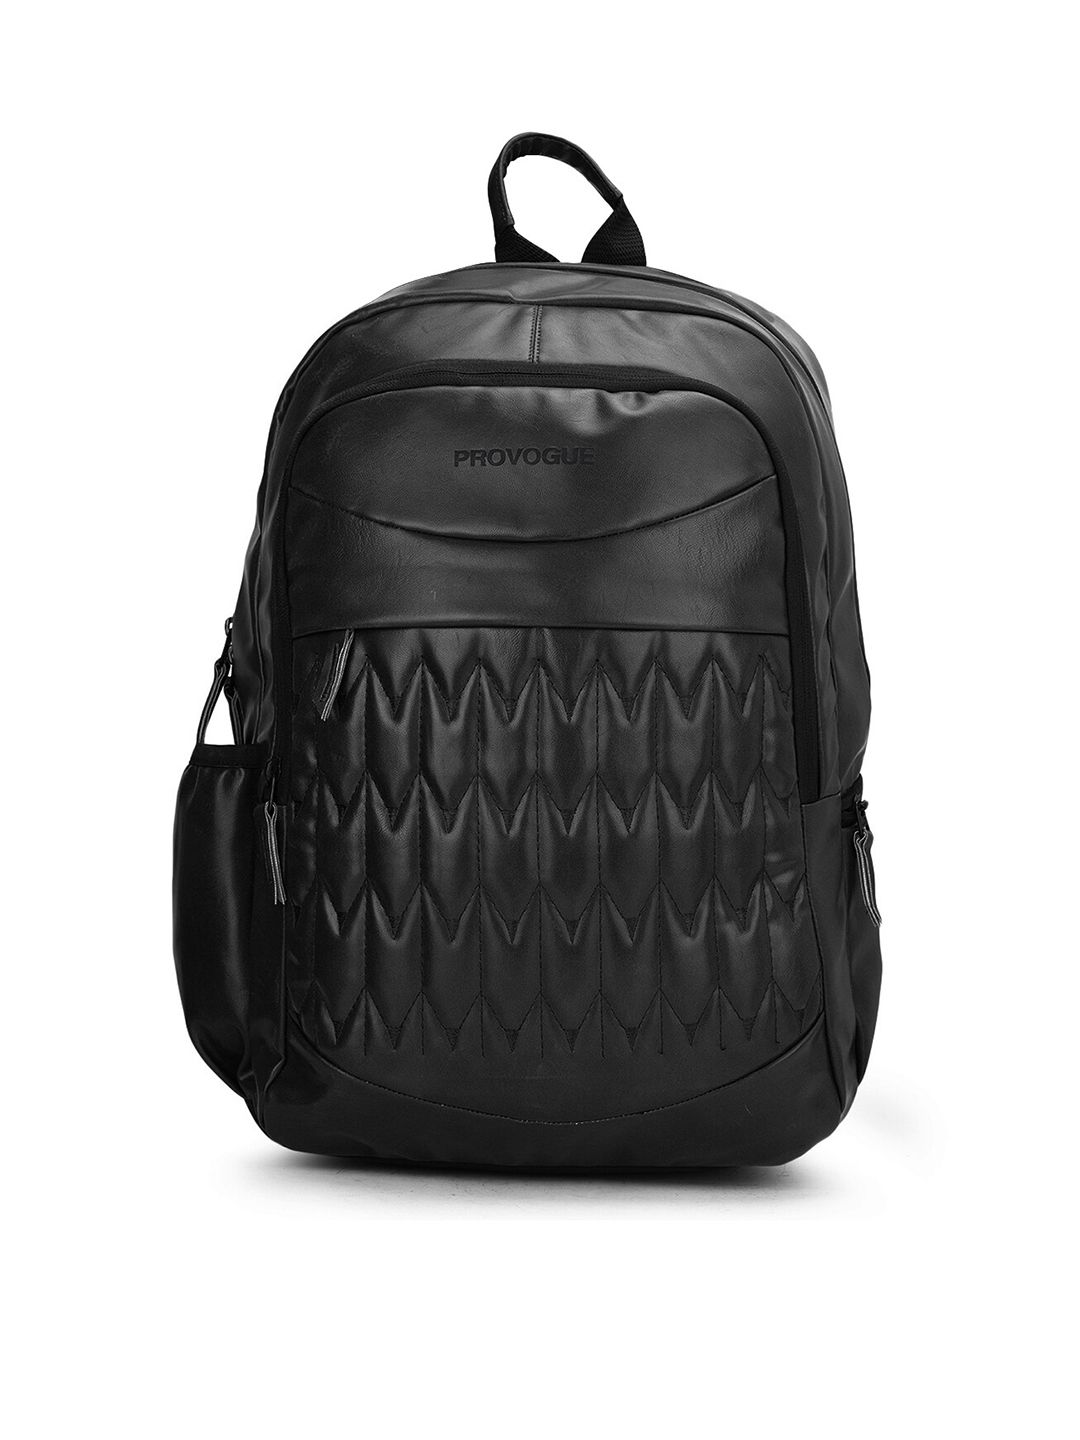 Provogue Black Brand Logo Printed Backpack With Rain cover Price in India